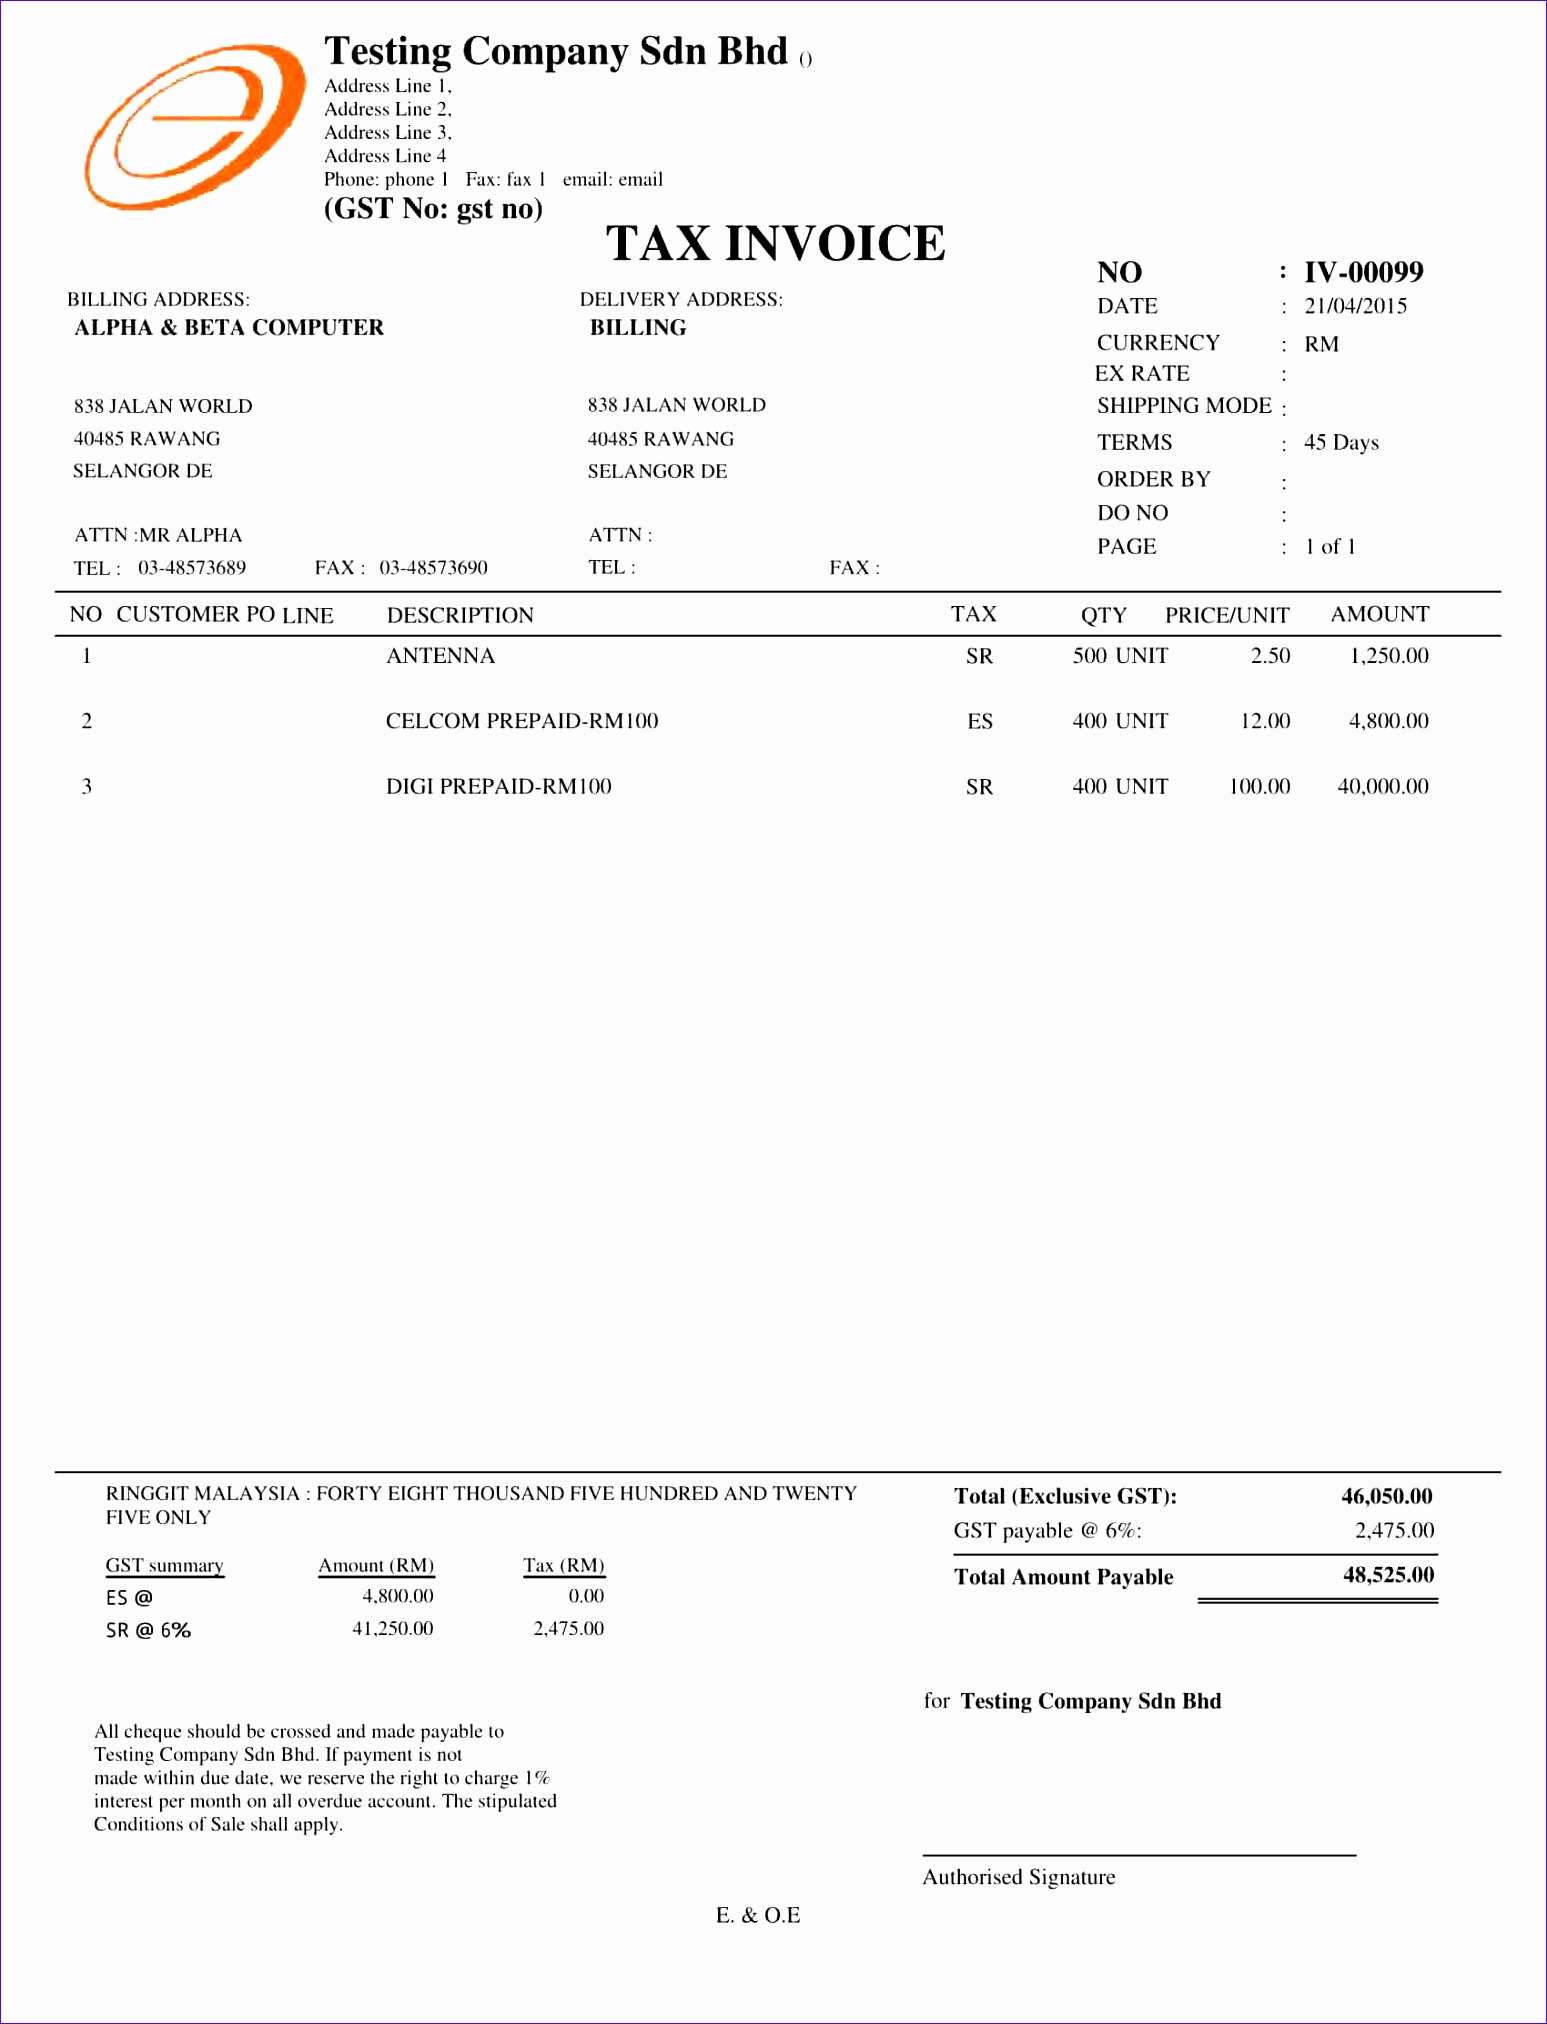 25 Tax Invoice WithGSTSummary 1